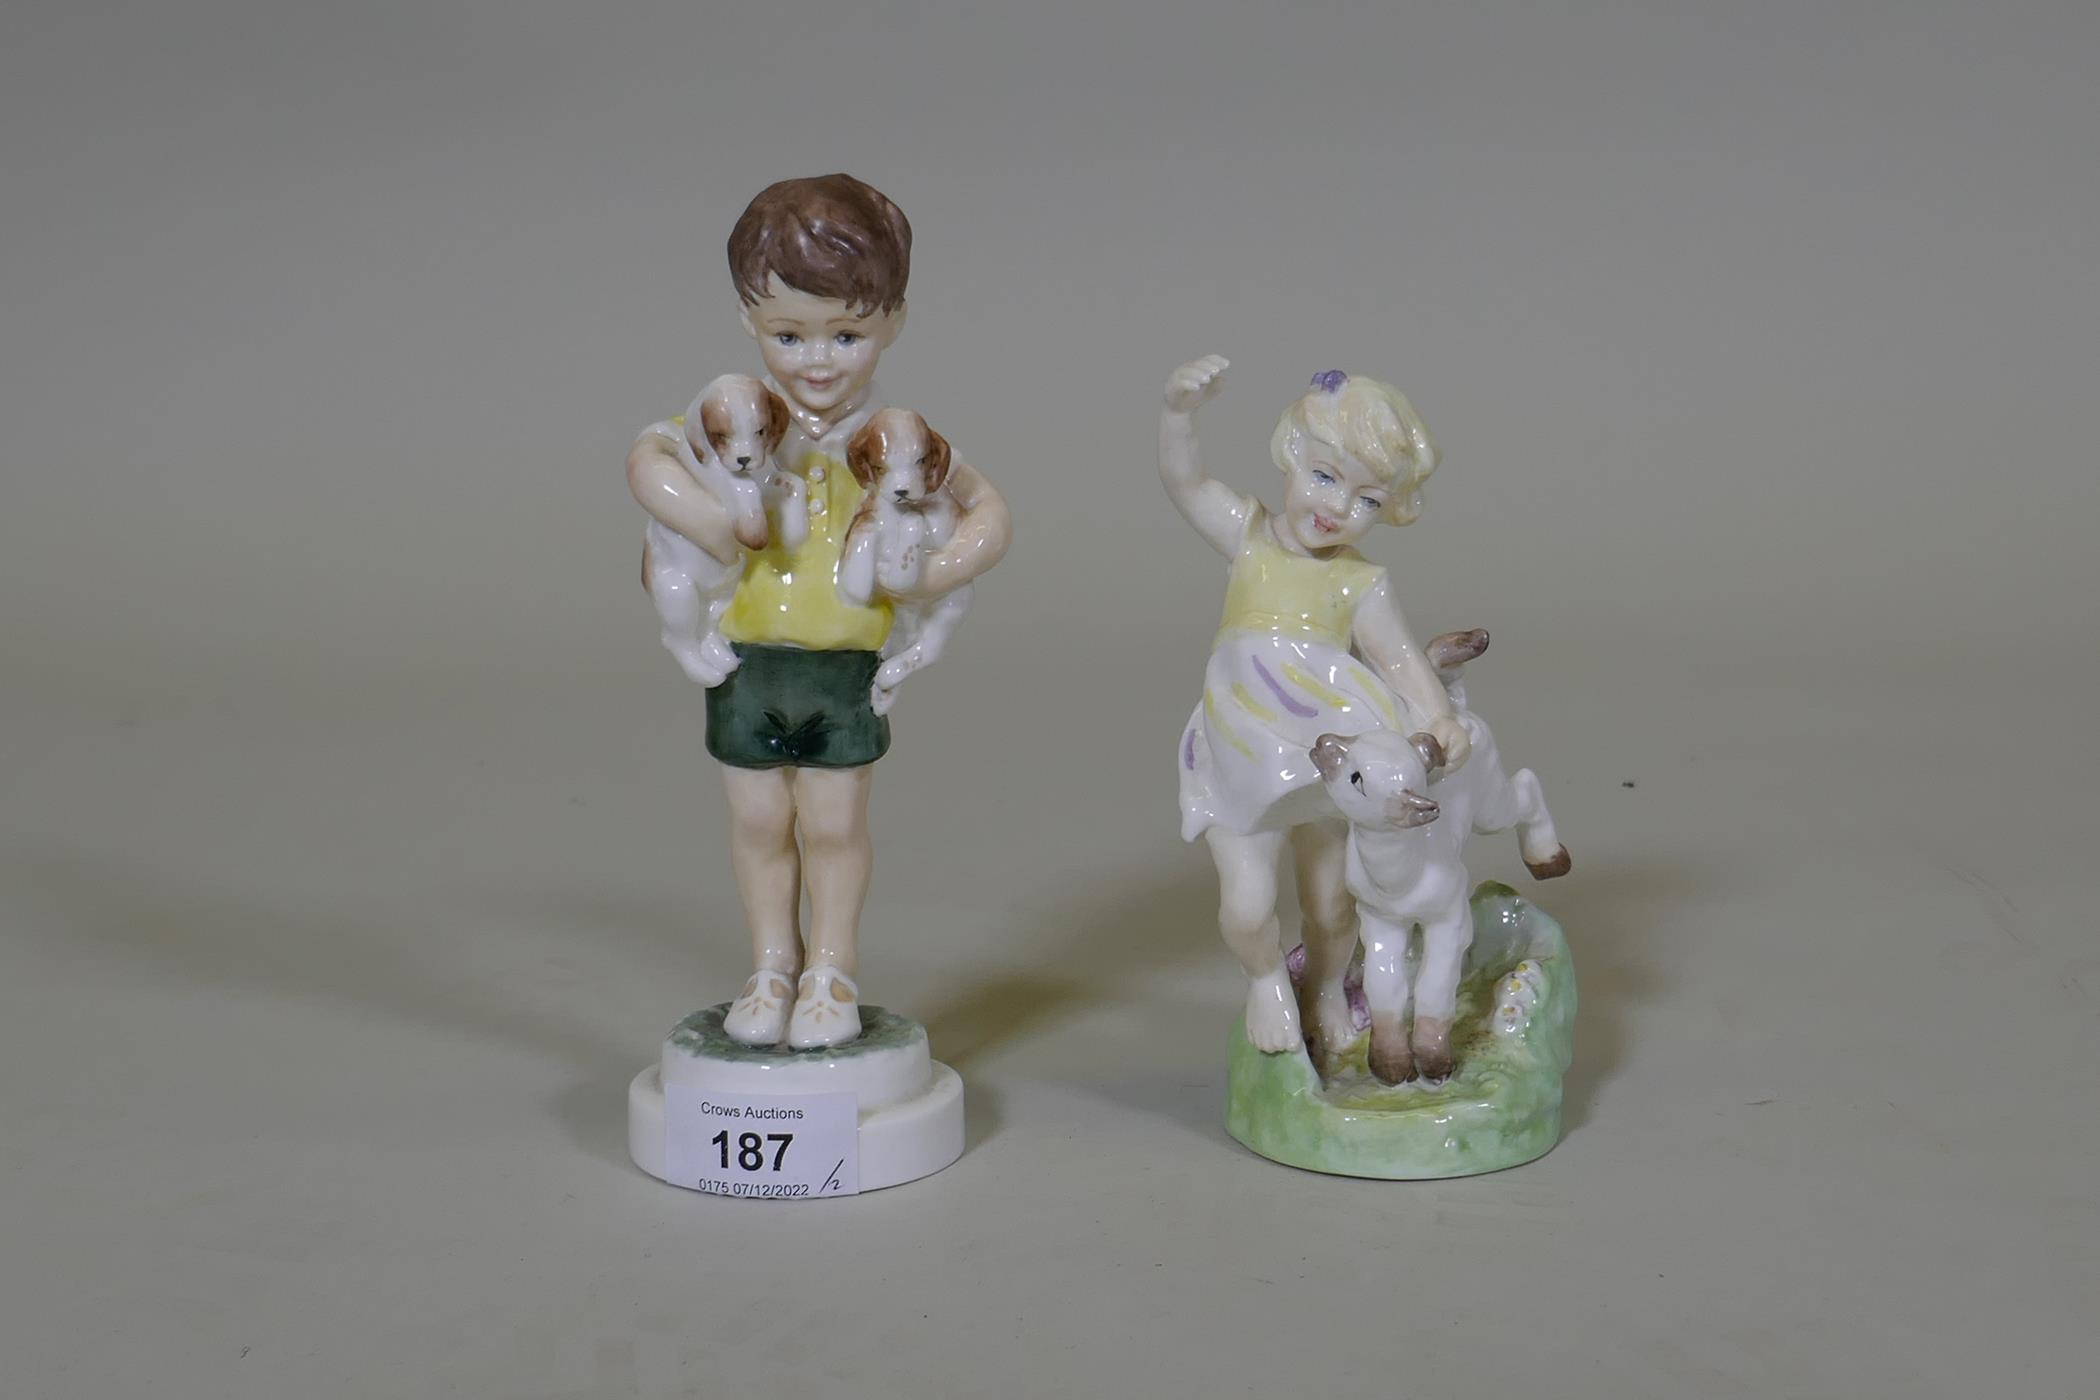 Royal Worcester figure, 'All Mine' No 3519, modelled by F.G. Doughty, and another, 'April' No